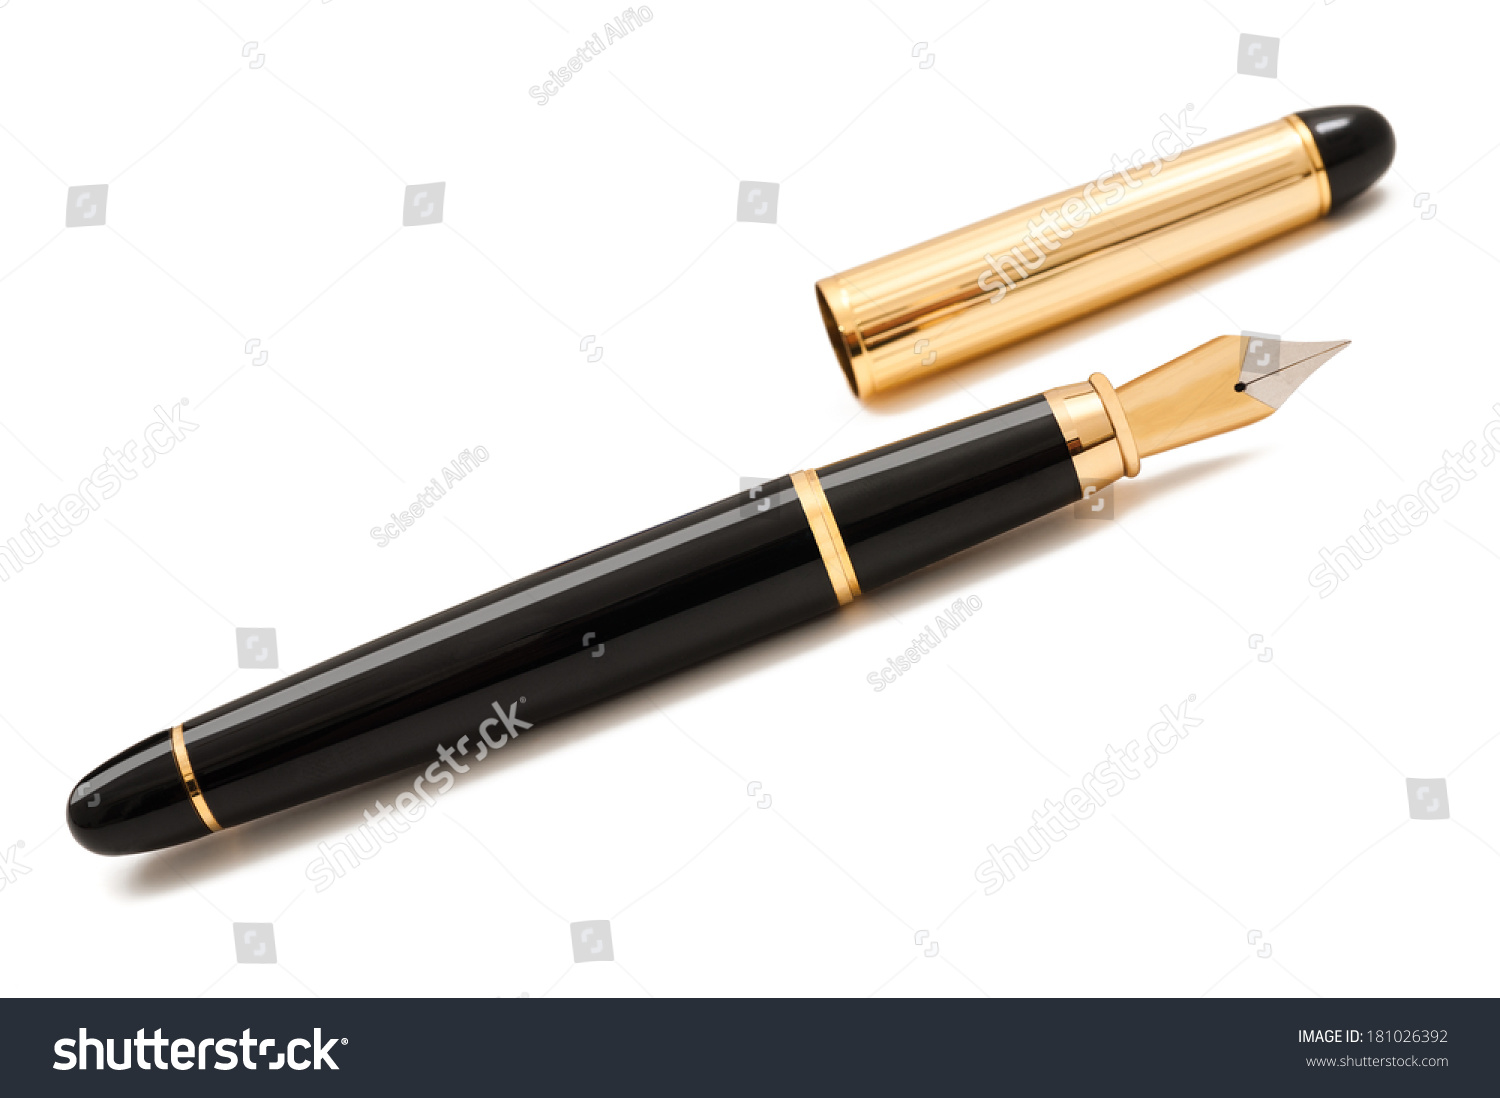 Fountain pen with cap isolated on white #181026392